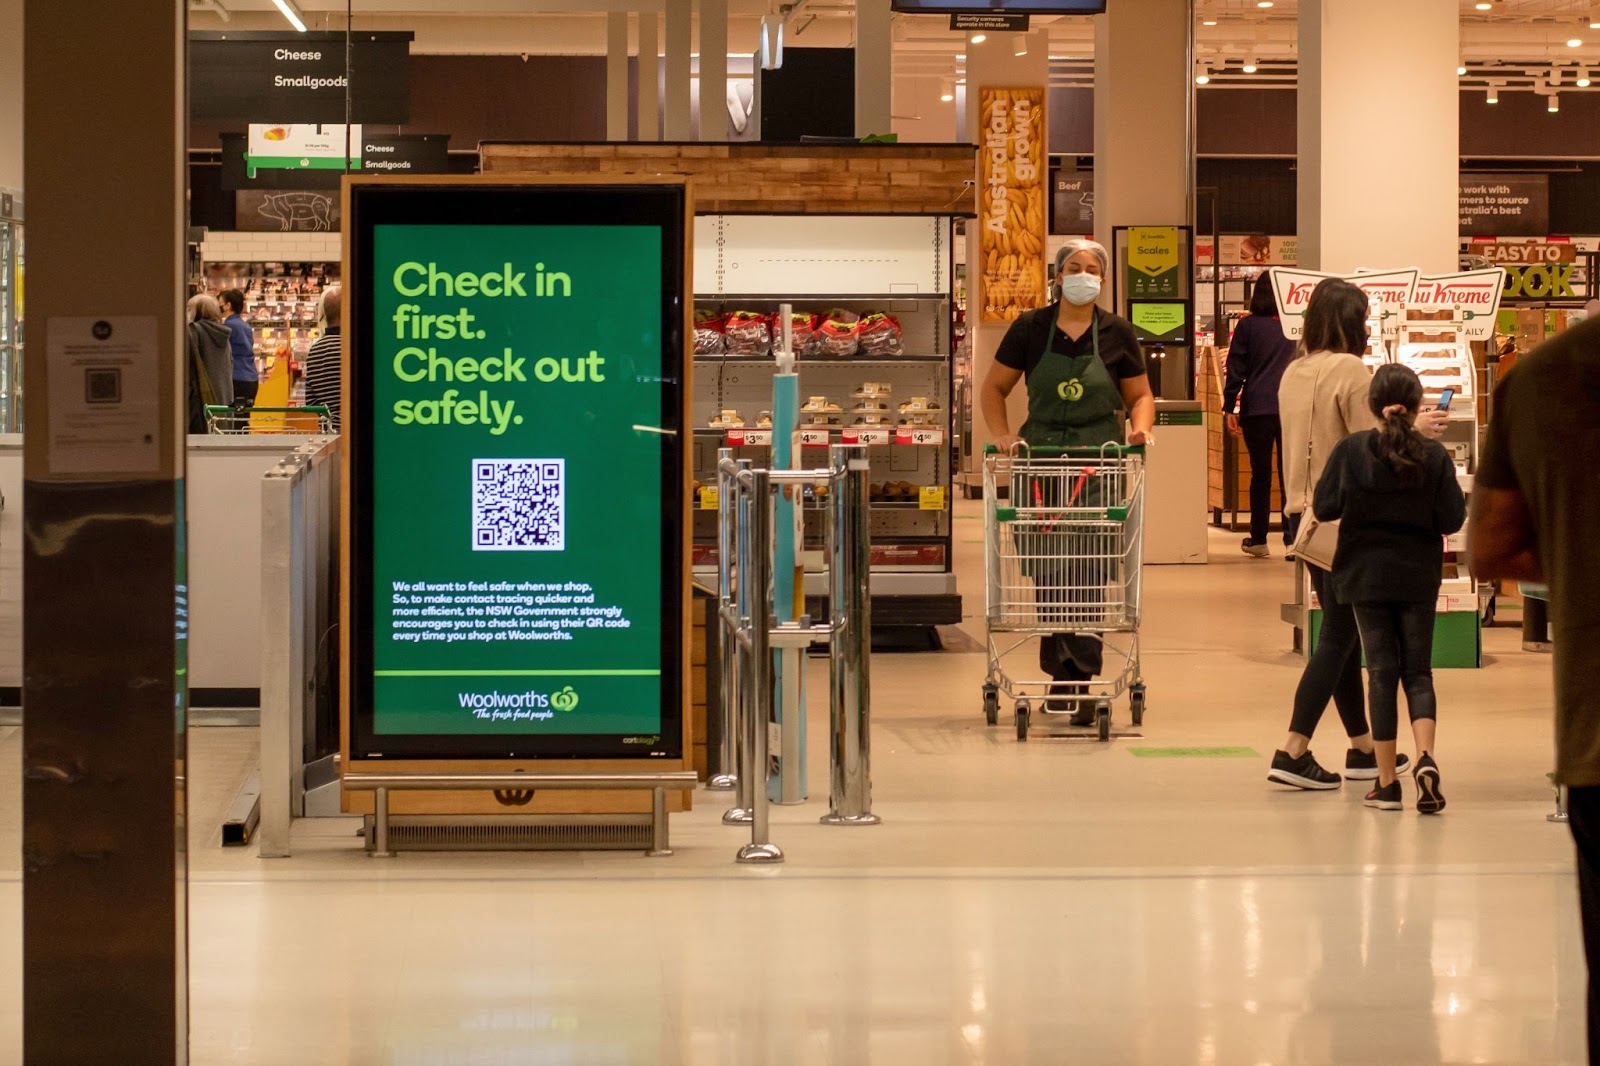 ai-for-digital-signage-system-a-case-study-for-retailers